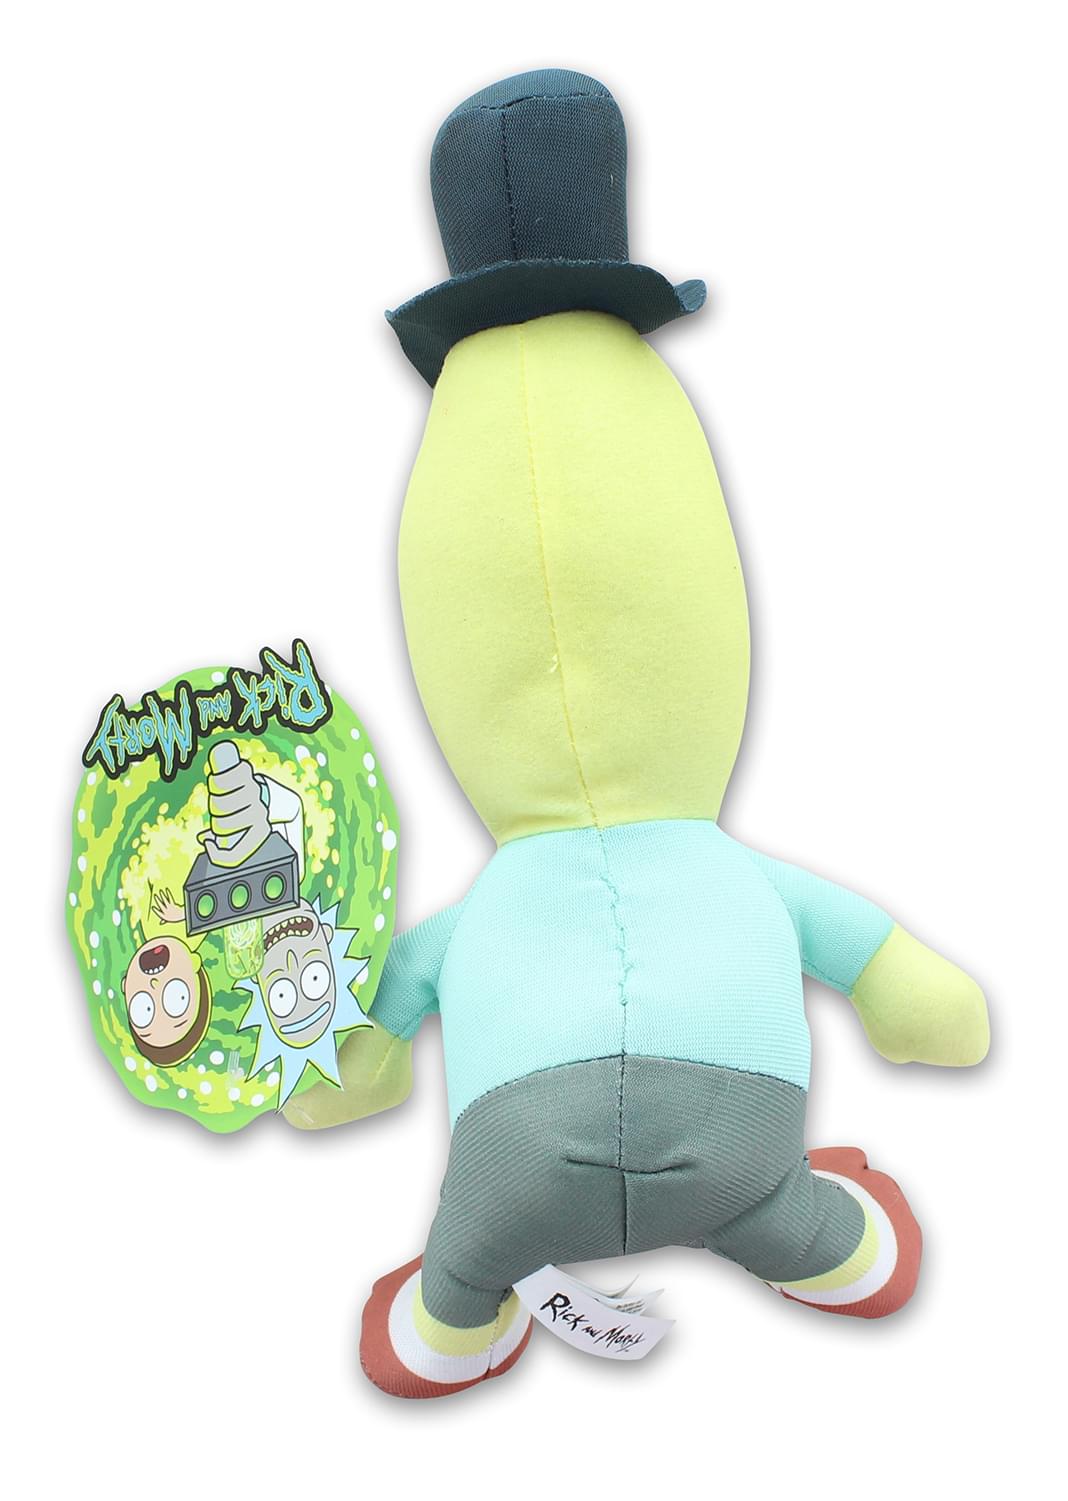 Rick & Morty 9 Inch Stuffed Character Plush | Mr. Poopy Butthole